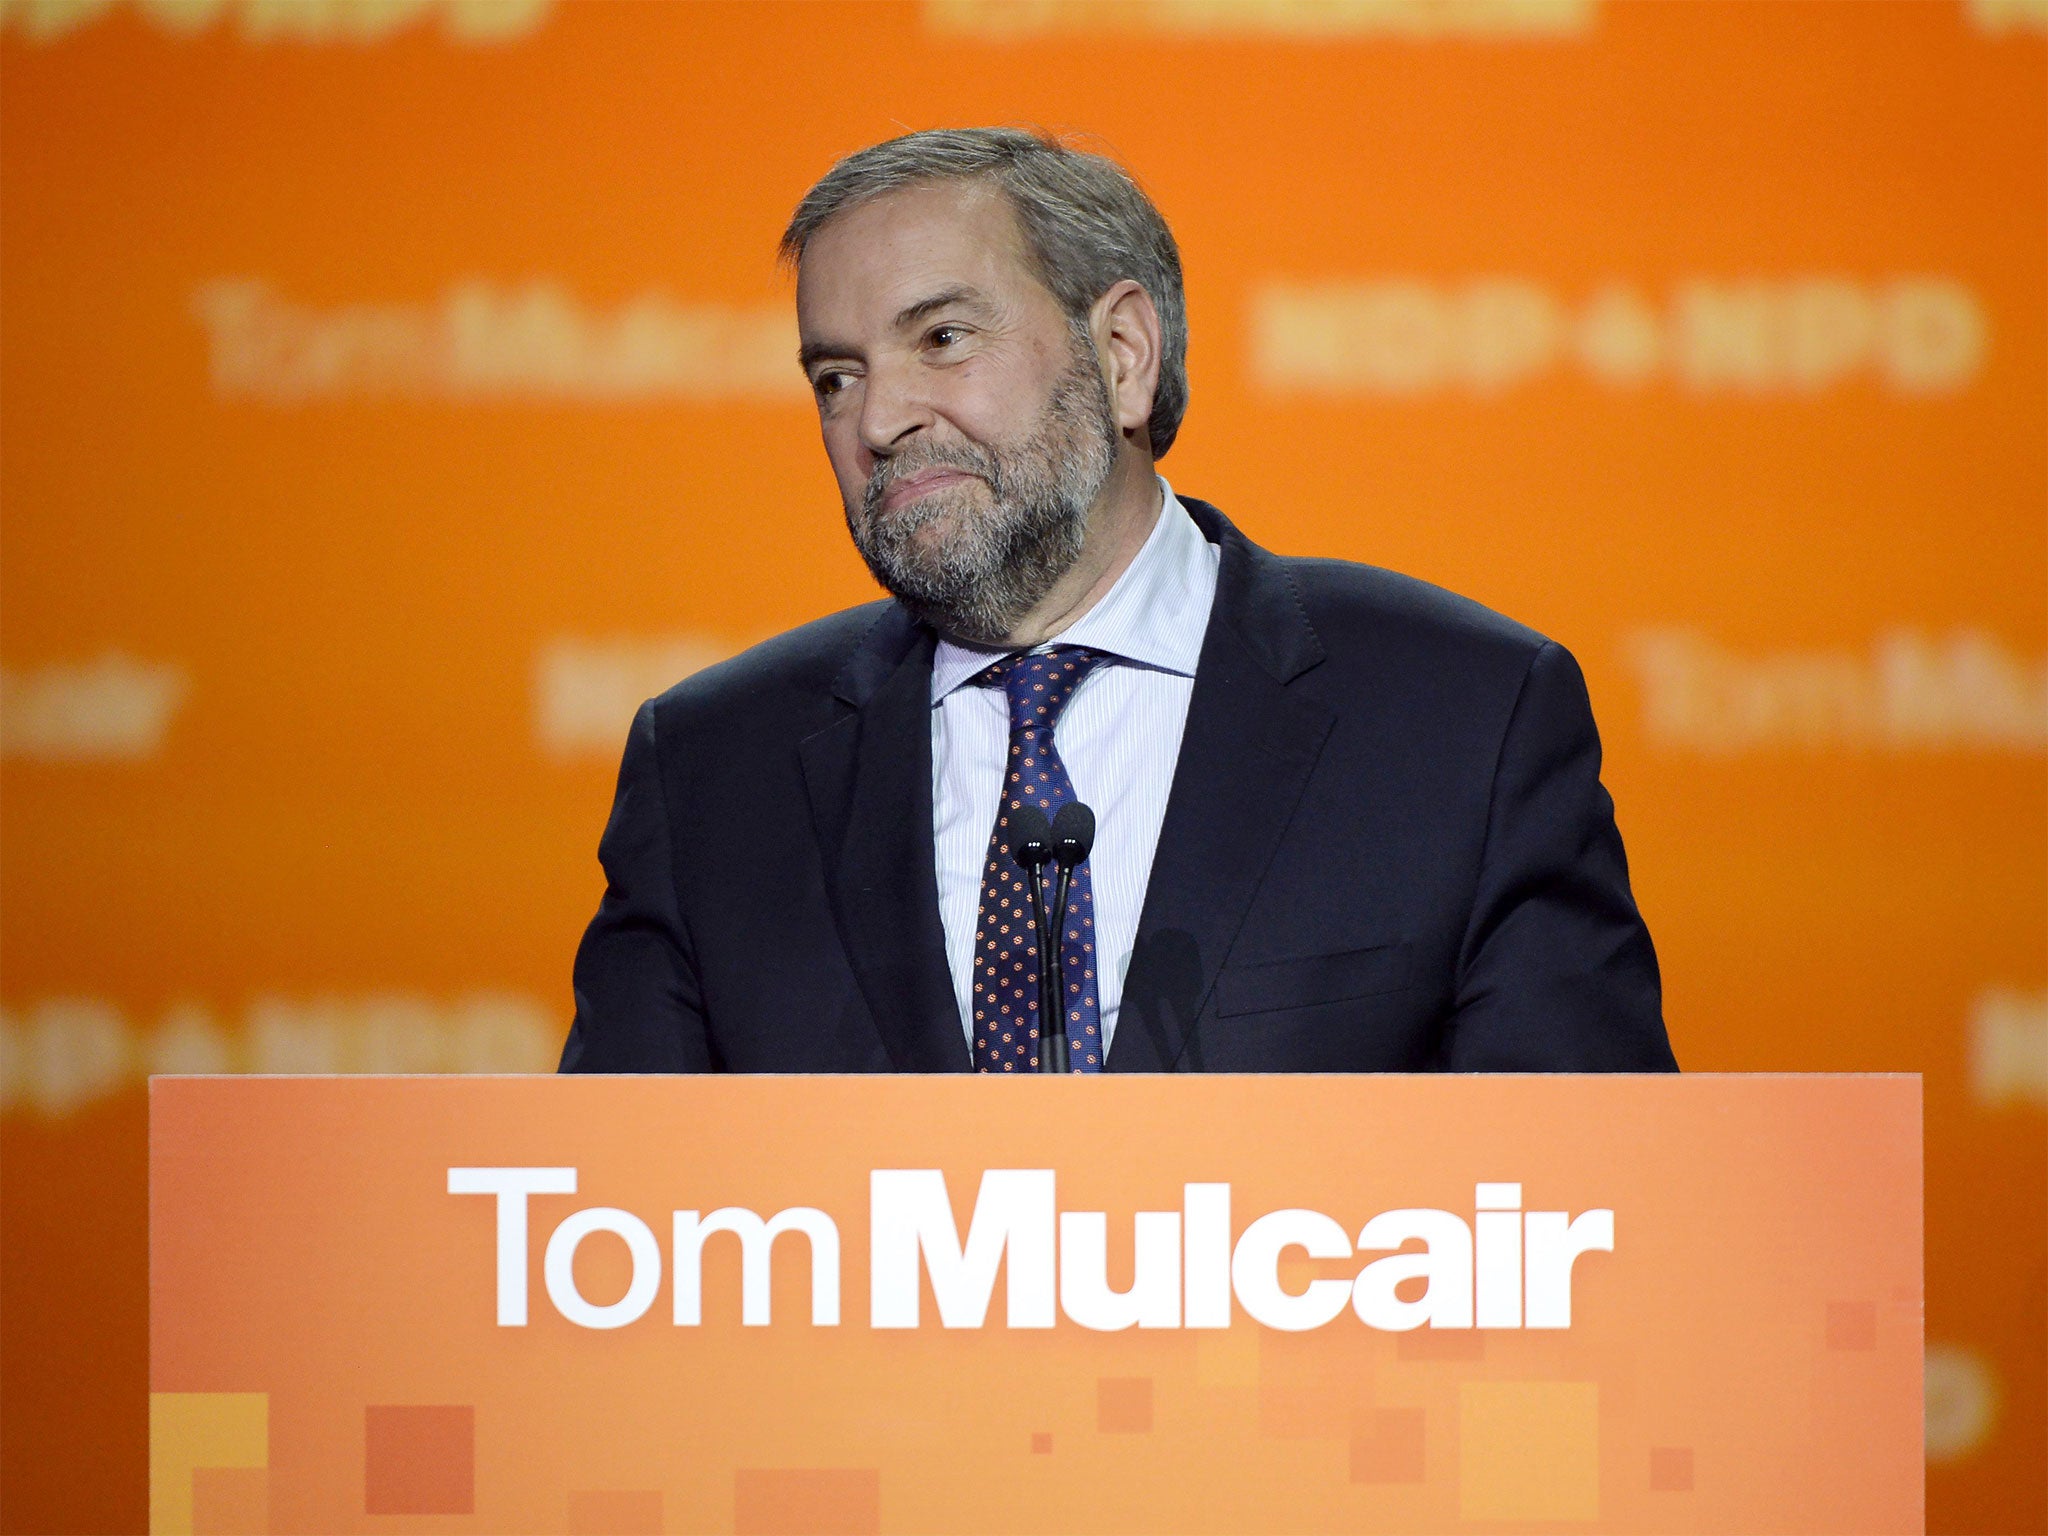 Tom Mulcair's New Democrats suffered a crushing defeat, falling to third place after winning official opposition status in the last election